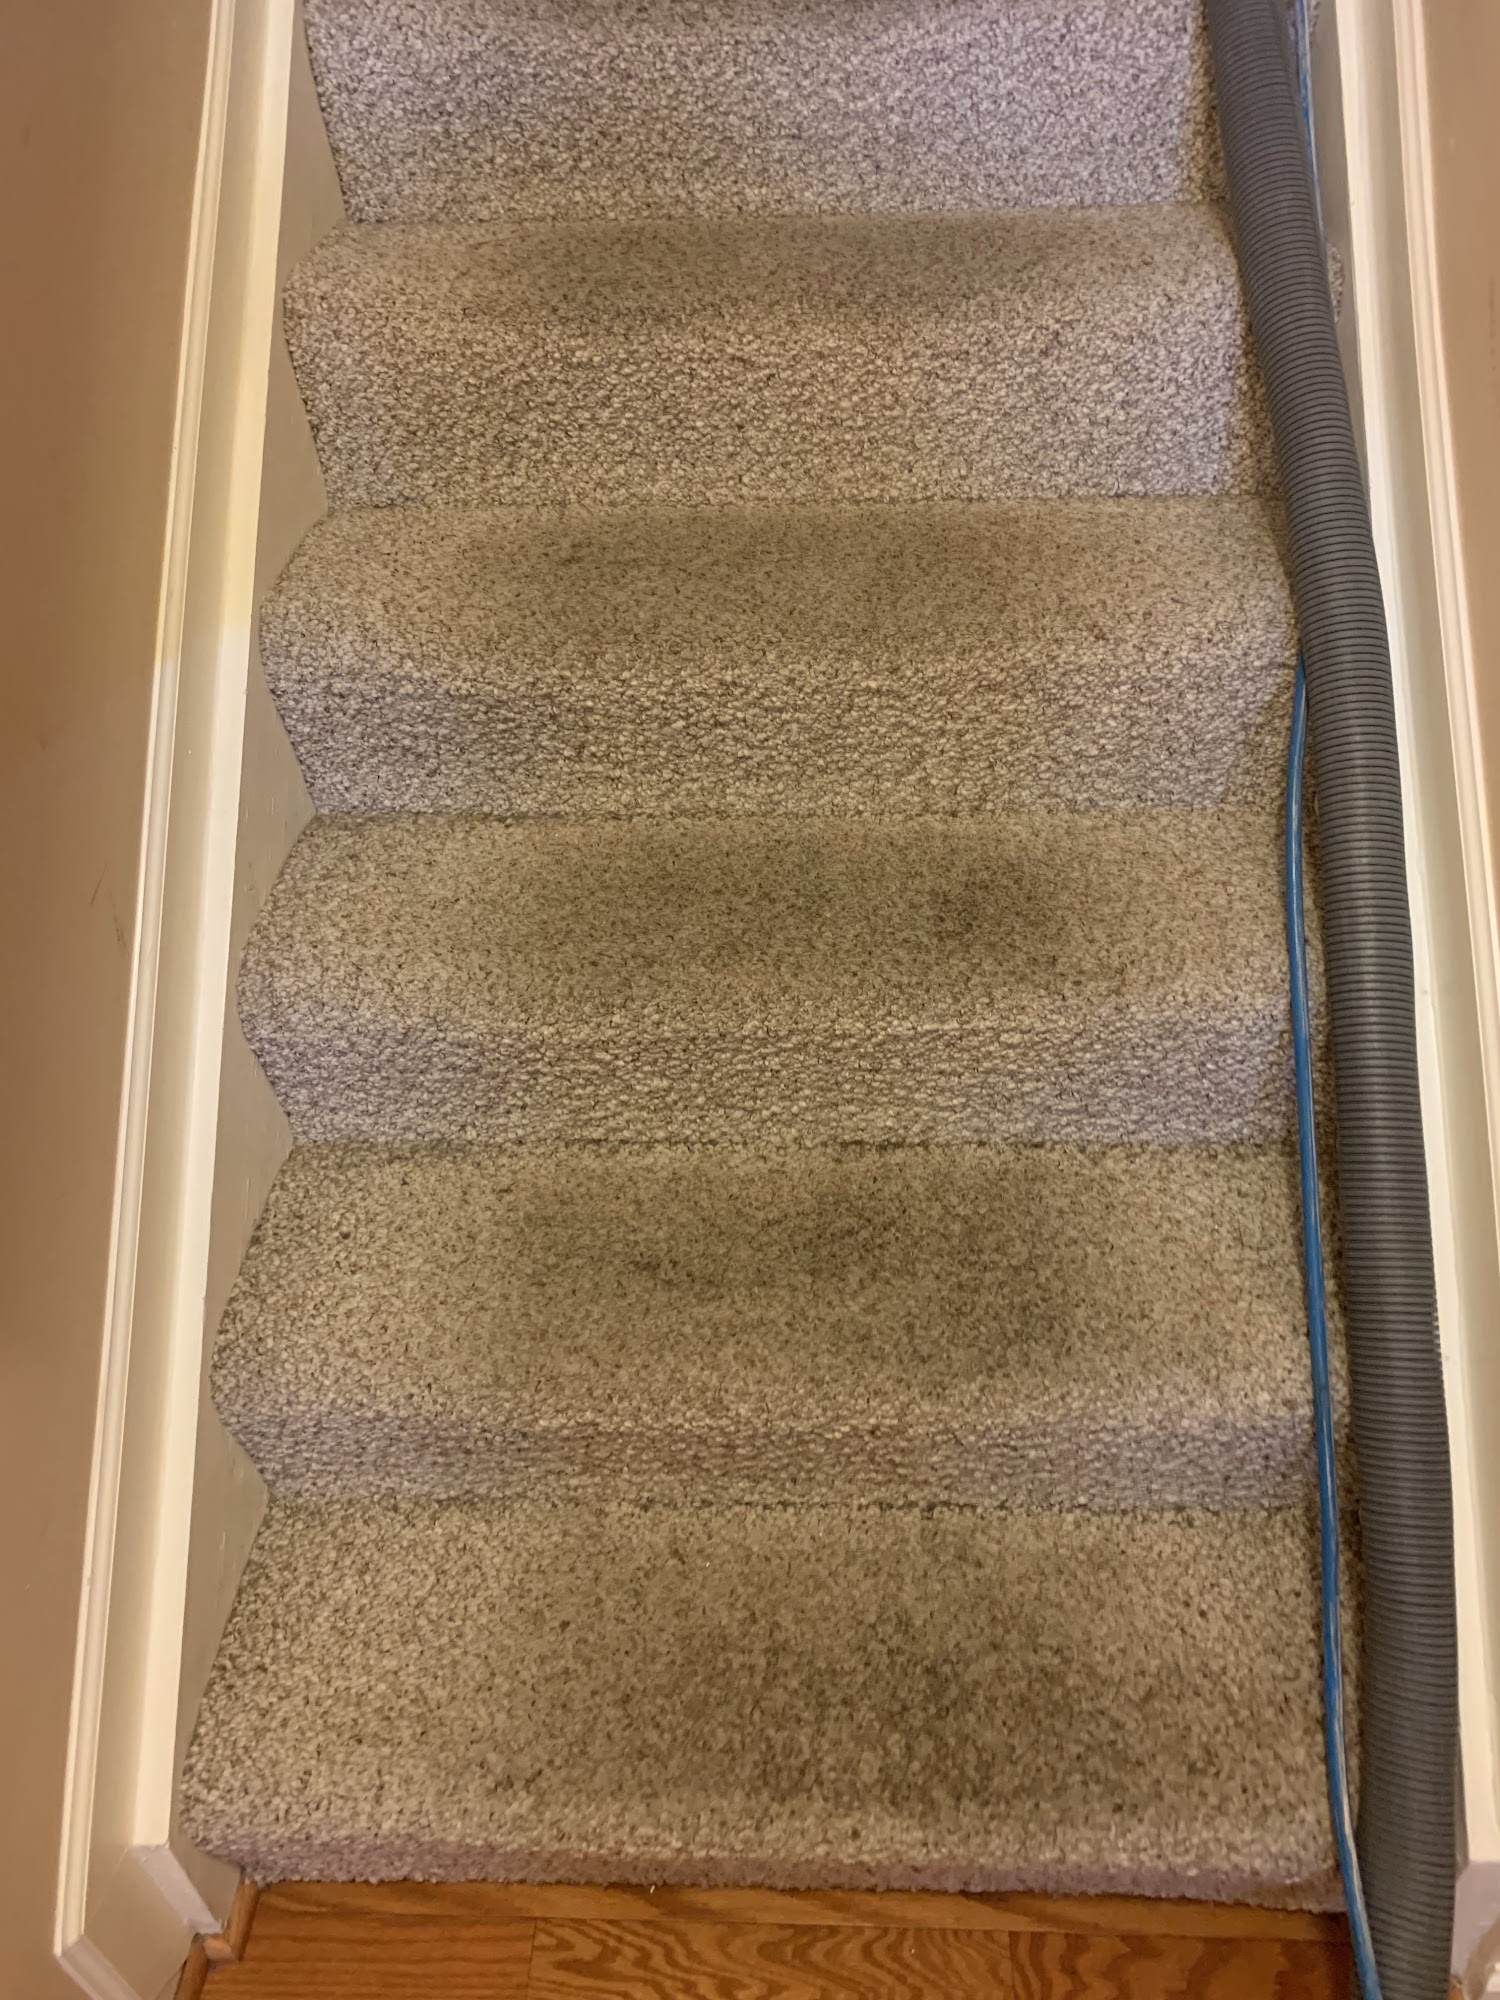 Maryland Carpet Cleaning Services 5024 Mt Carmel Rd, Hampstead Maryland 21074